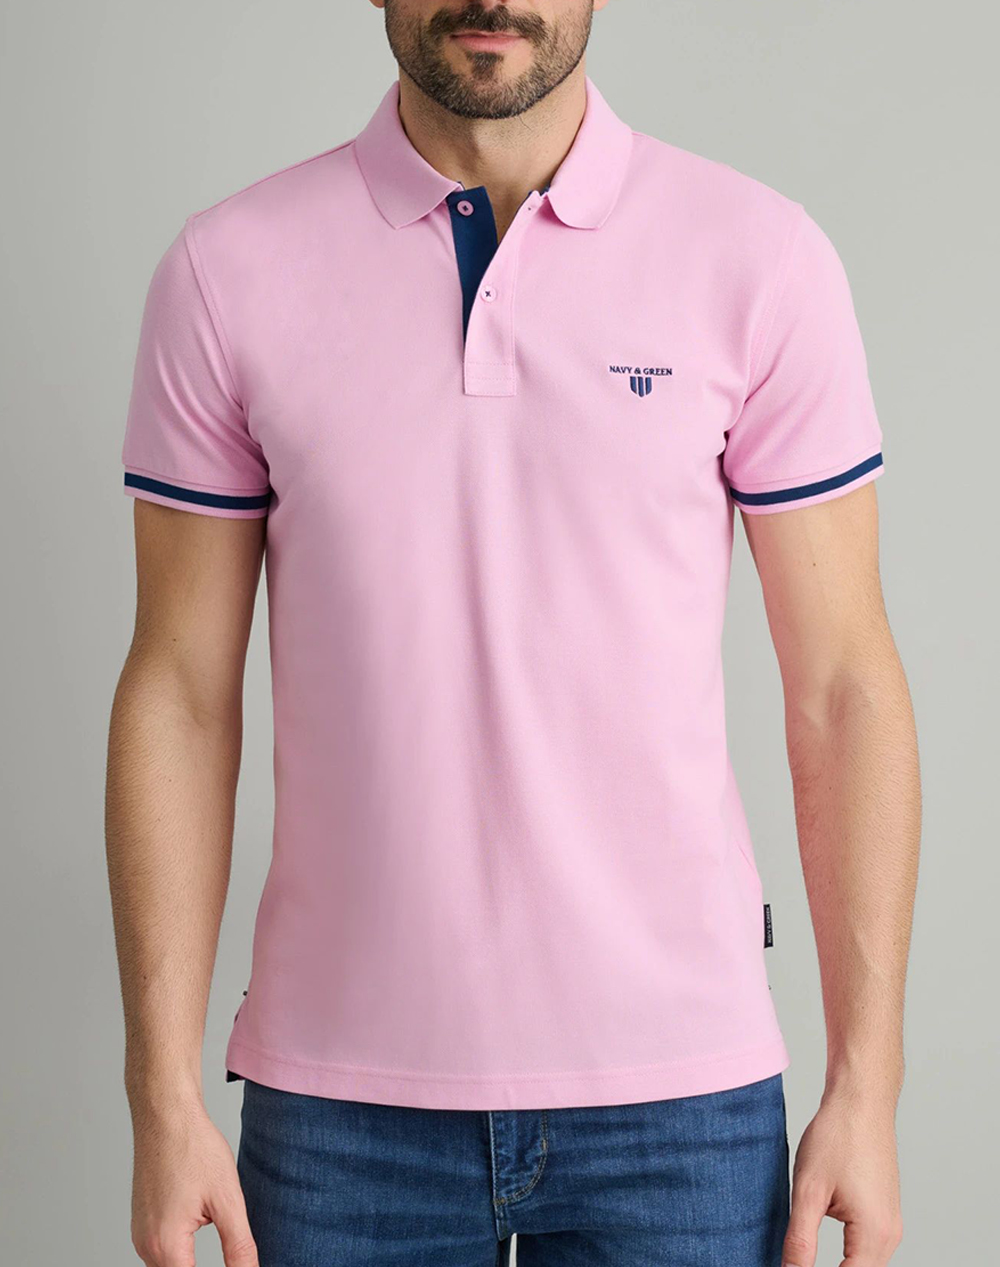 NAVY&GREEN POLO ΜΠΛΟΥΖΑΚΙ-YOUNG LINE 24GE.879/YL.2-PINK MIST LightPink